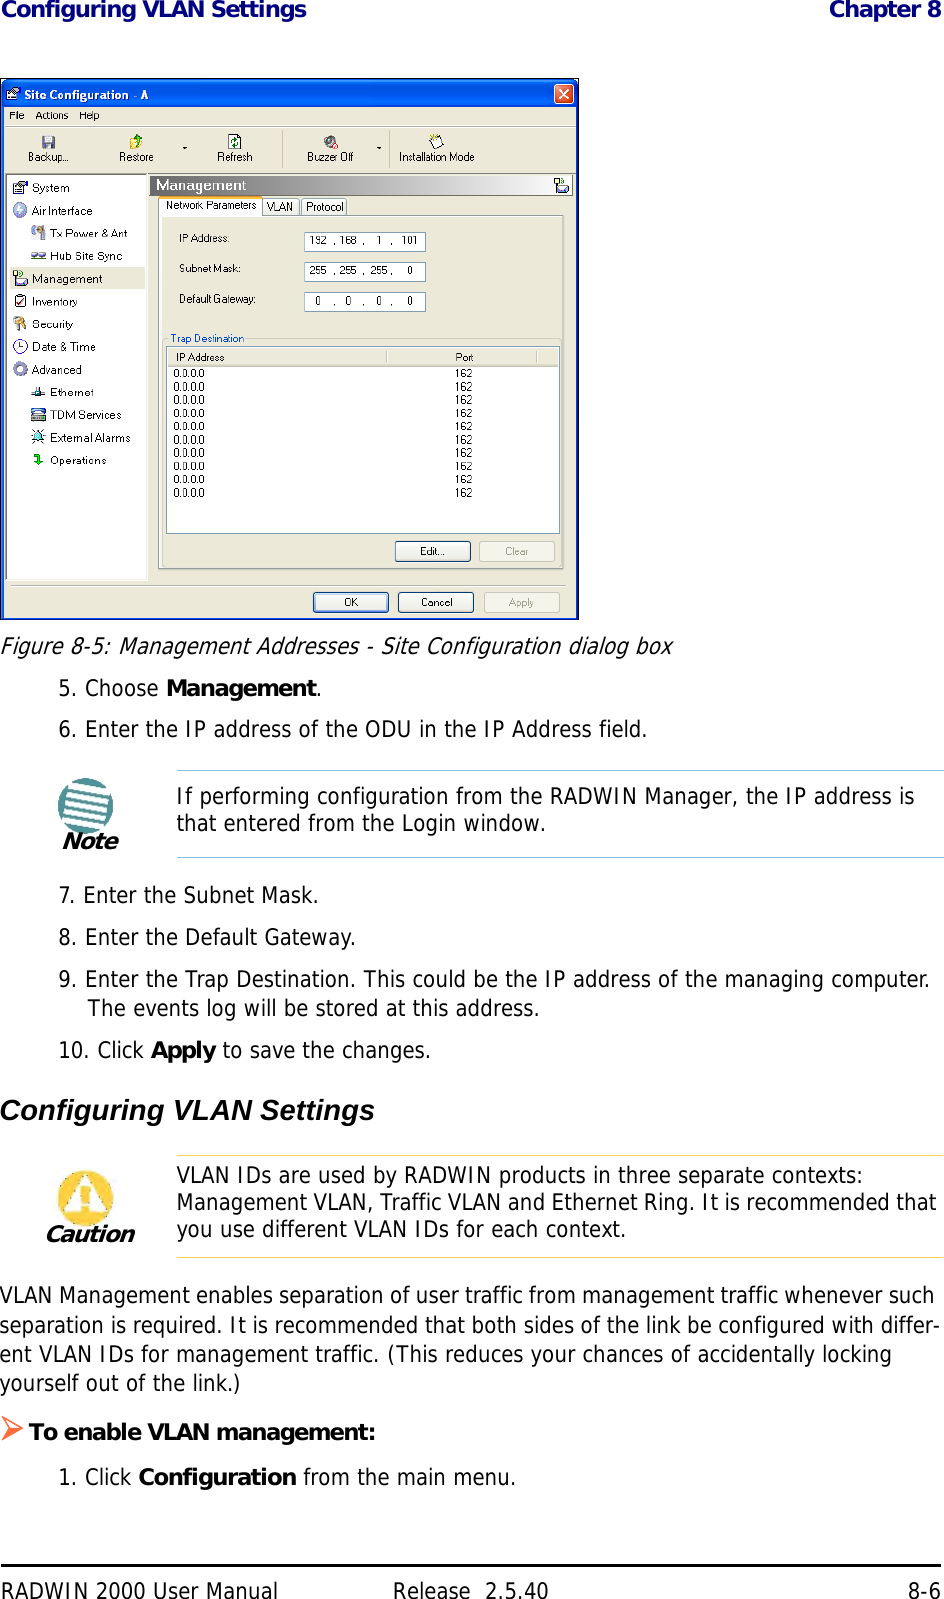 Configuring VLAN Settings Chapter 8RADWIN 2000 User Manual Release  2.5.40 8-6Figure 8-5: Management Addresses - Site Configuration dialog box5. Choose Management.6. Enter the IP address of the ODU in the IP Address field.7. Enter the Subnet Mask.8. Enter the Default Gateway.9. Enter the Trap Destination. This could be the IP address of the managing computer. The events log will be stored at this address.10. Click Apply to save the changes.Configuring VLAN SettingsVLAN Management enables separation of user traffic from management traffic whenever such separation is required. It is recommended that both sides of the link be configured with differ-ent VLAN IDs for management traffic. (This reduces your chances of accidentally locking yourself out of the link.)To enable VLAN management:1. Click Configuration from the main menu.NoteIf performing configuration from the RADWIN Manager, the IP address is that entered from the Login window.CautionVLAN IDs are used by RADWIN products in three separate contexts: Management VLAN, Traffic VLAN and Ethernet Ring. It is recommended that you use different VLAN IDs for each context.